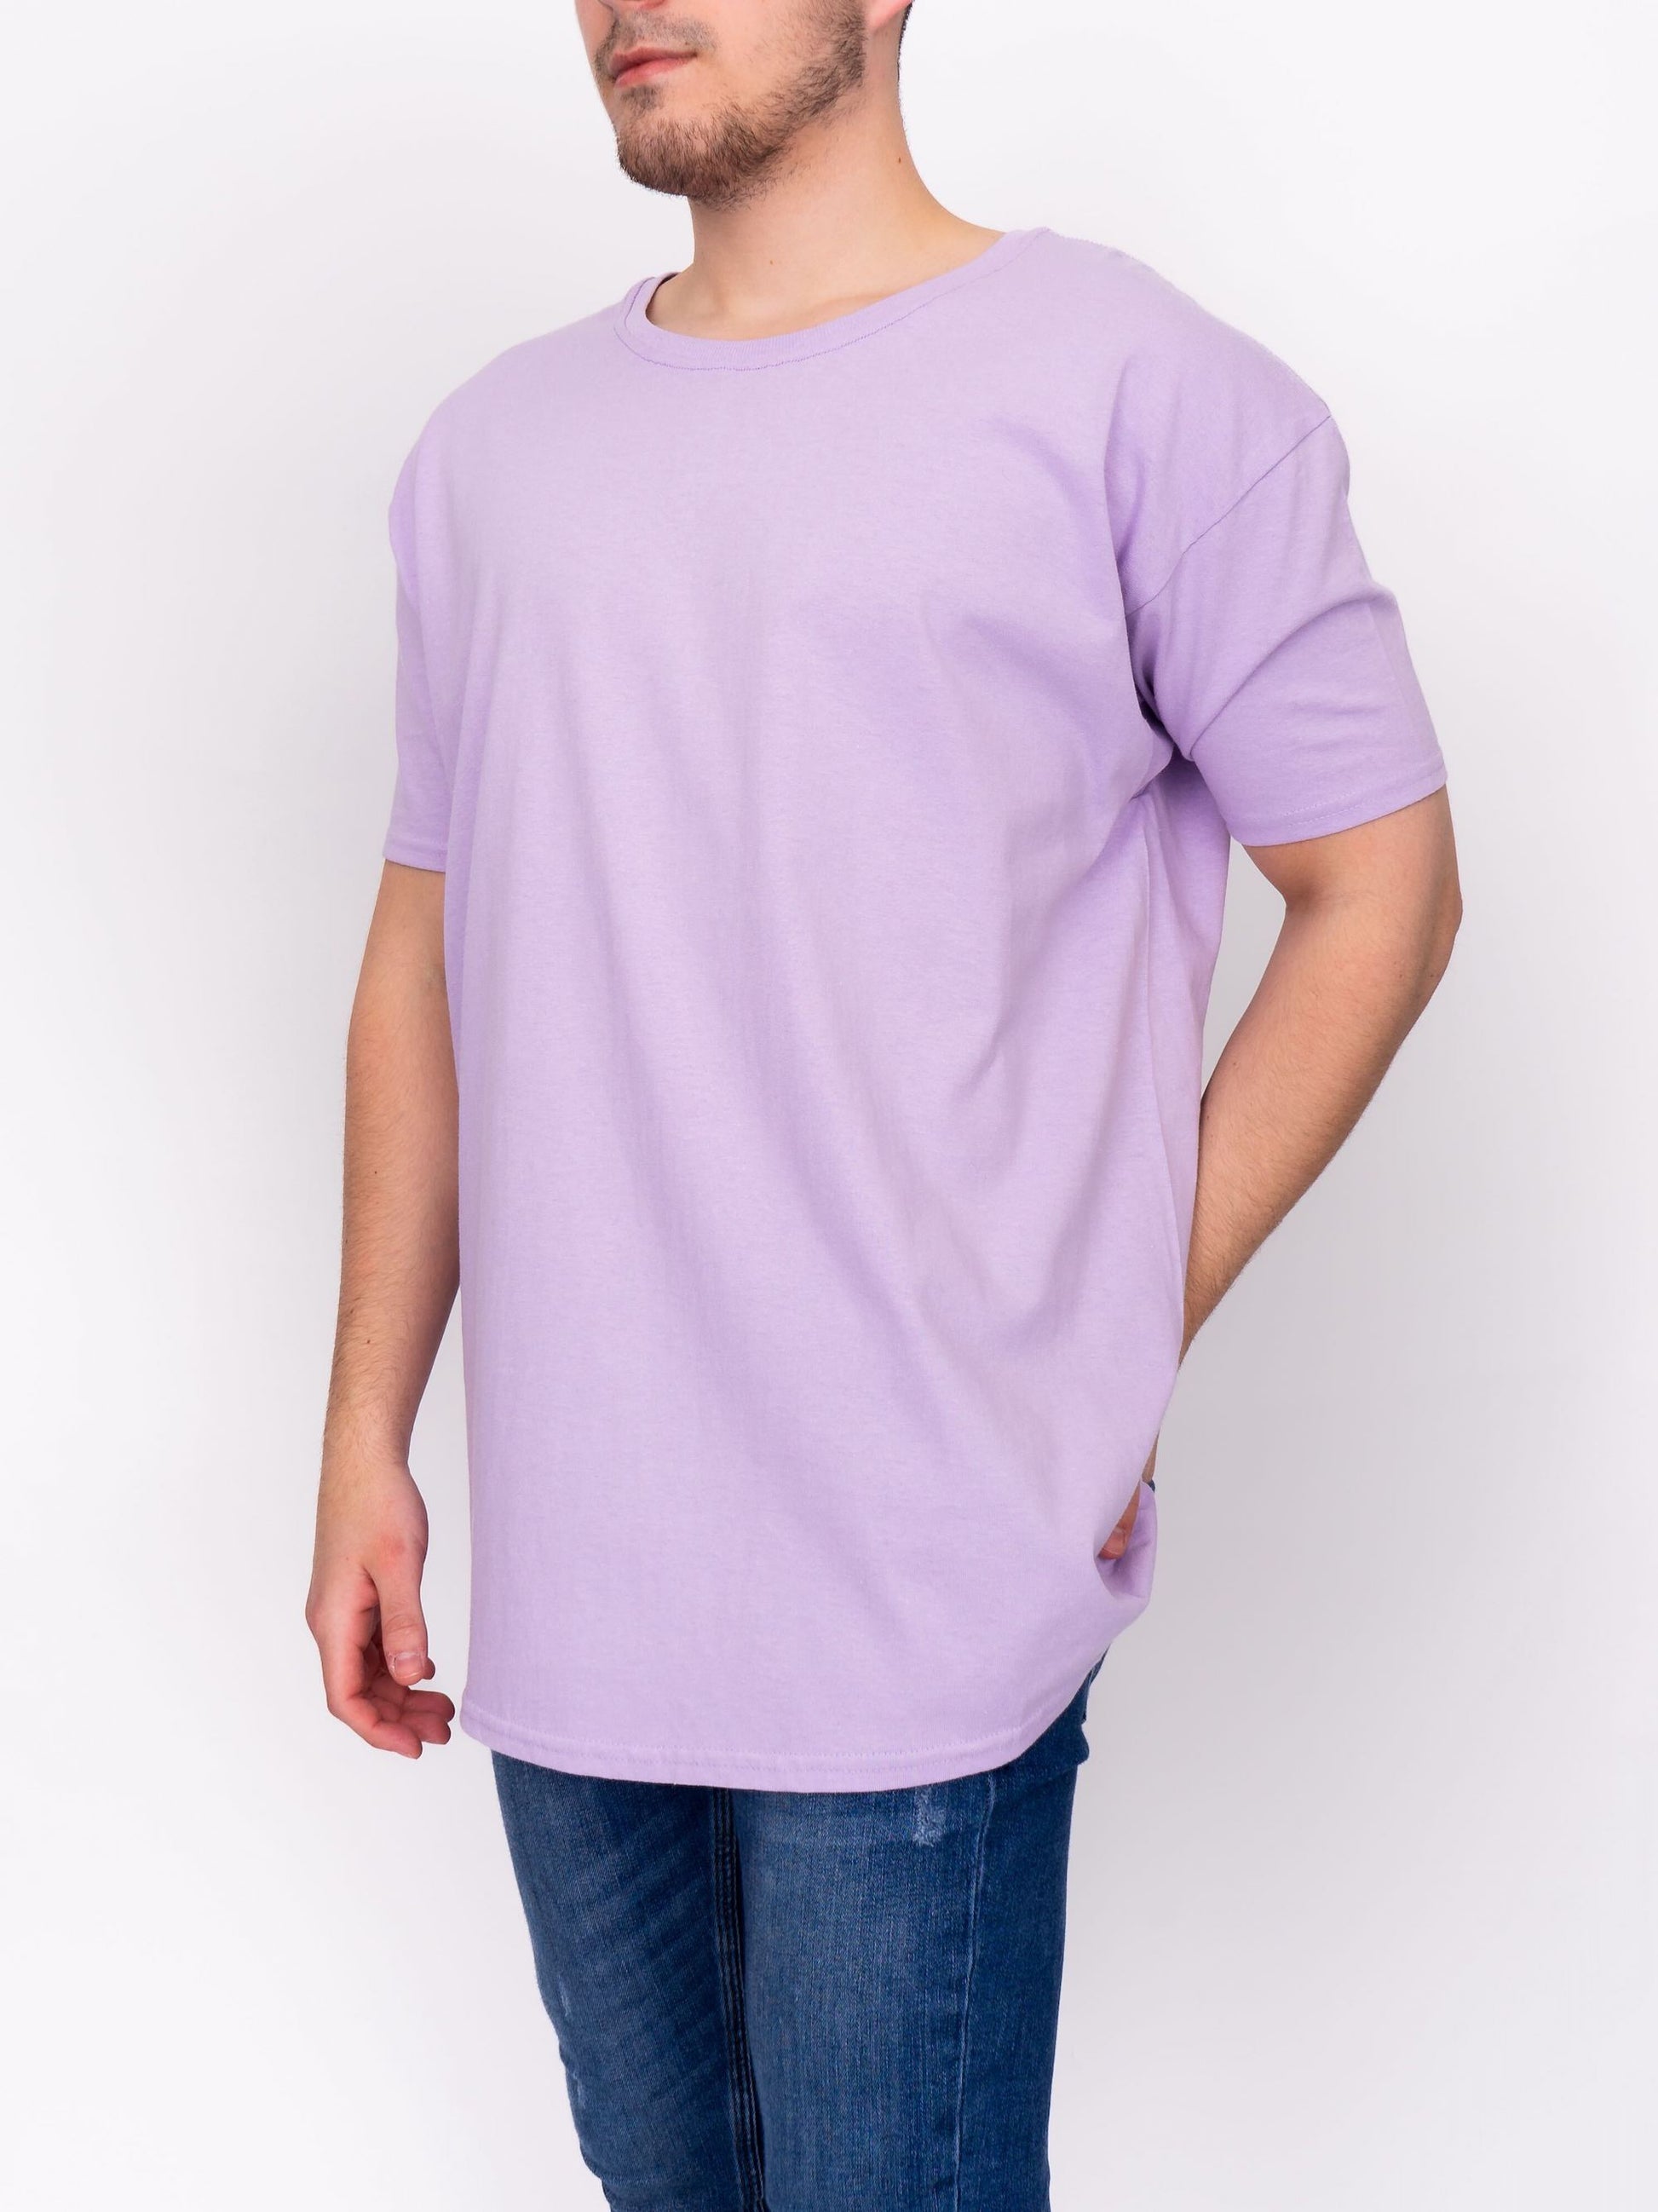 Oversize T-Shirt in Lilac - DEEP Clothing